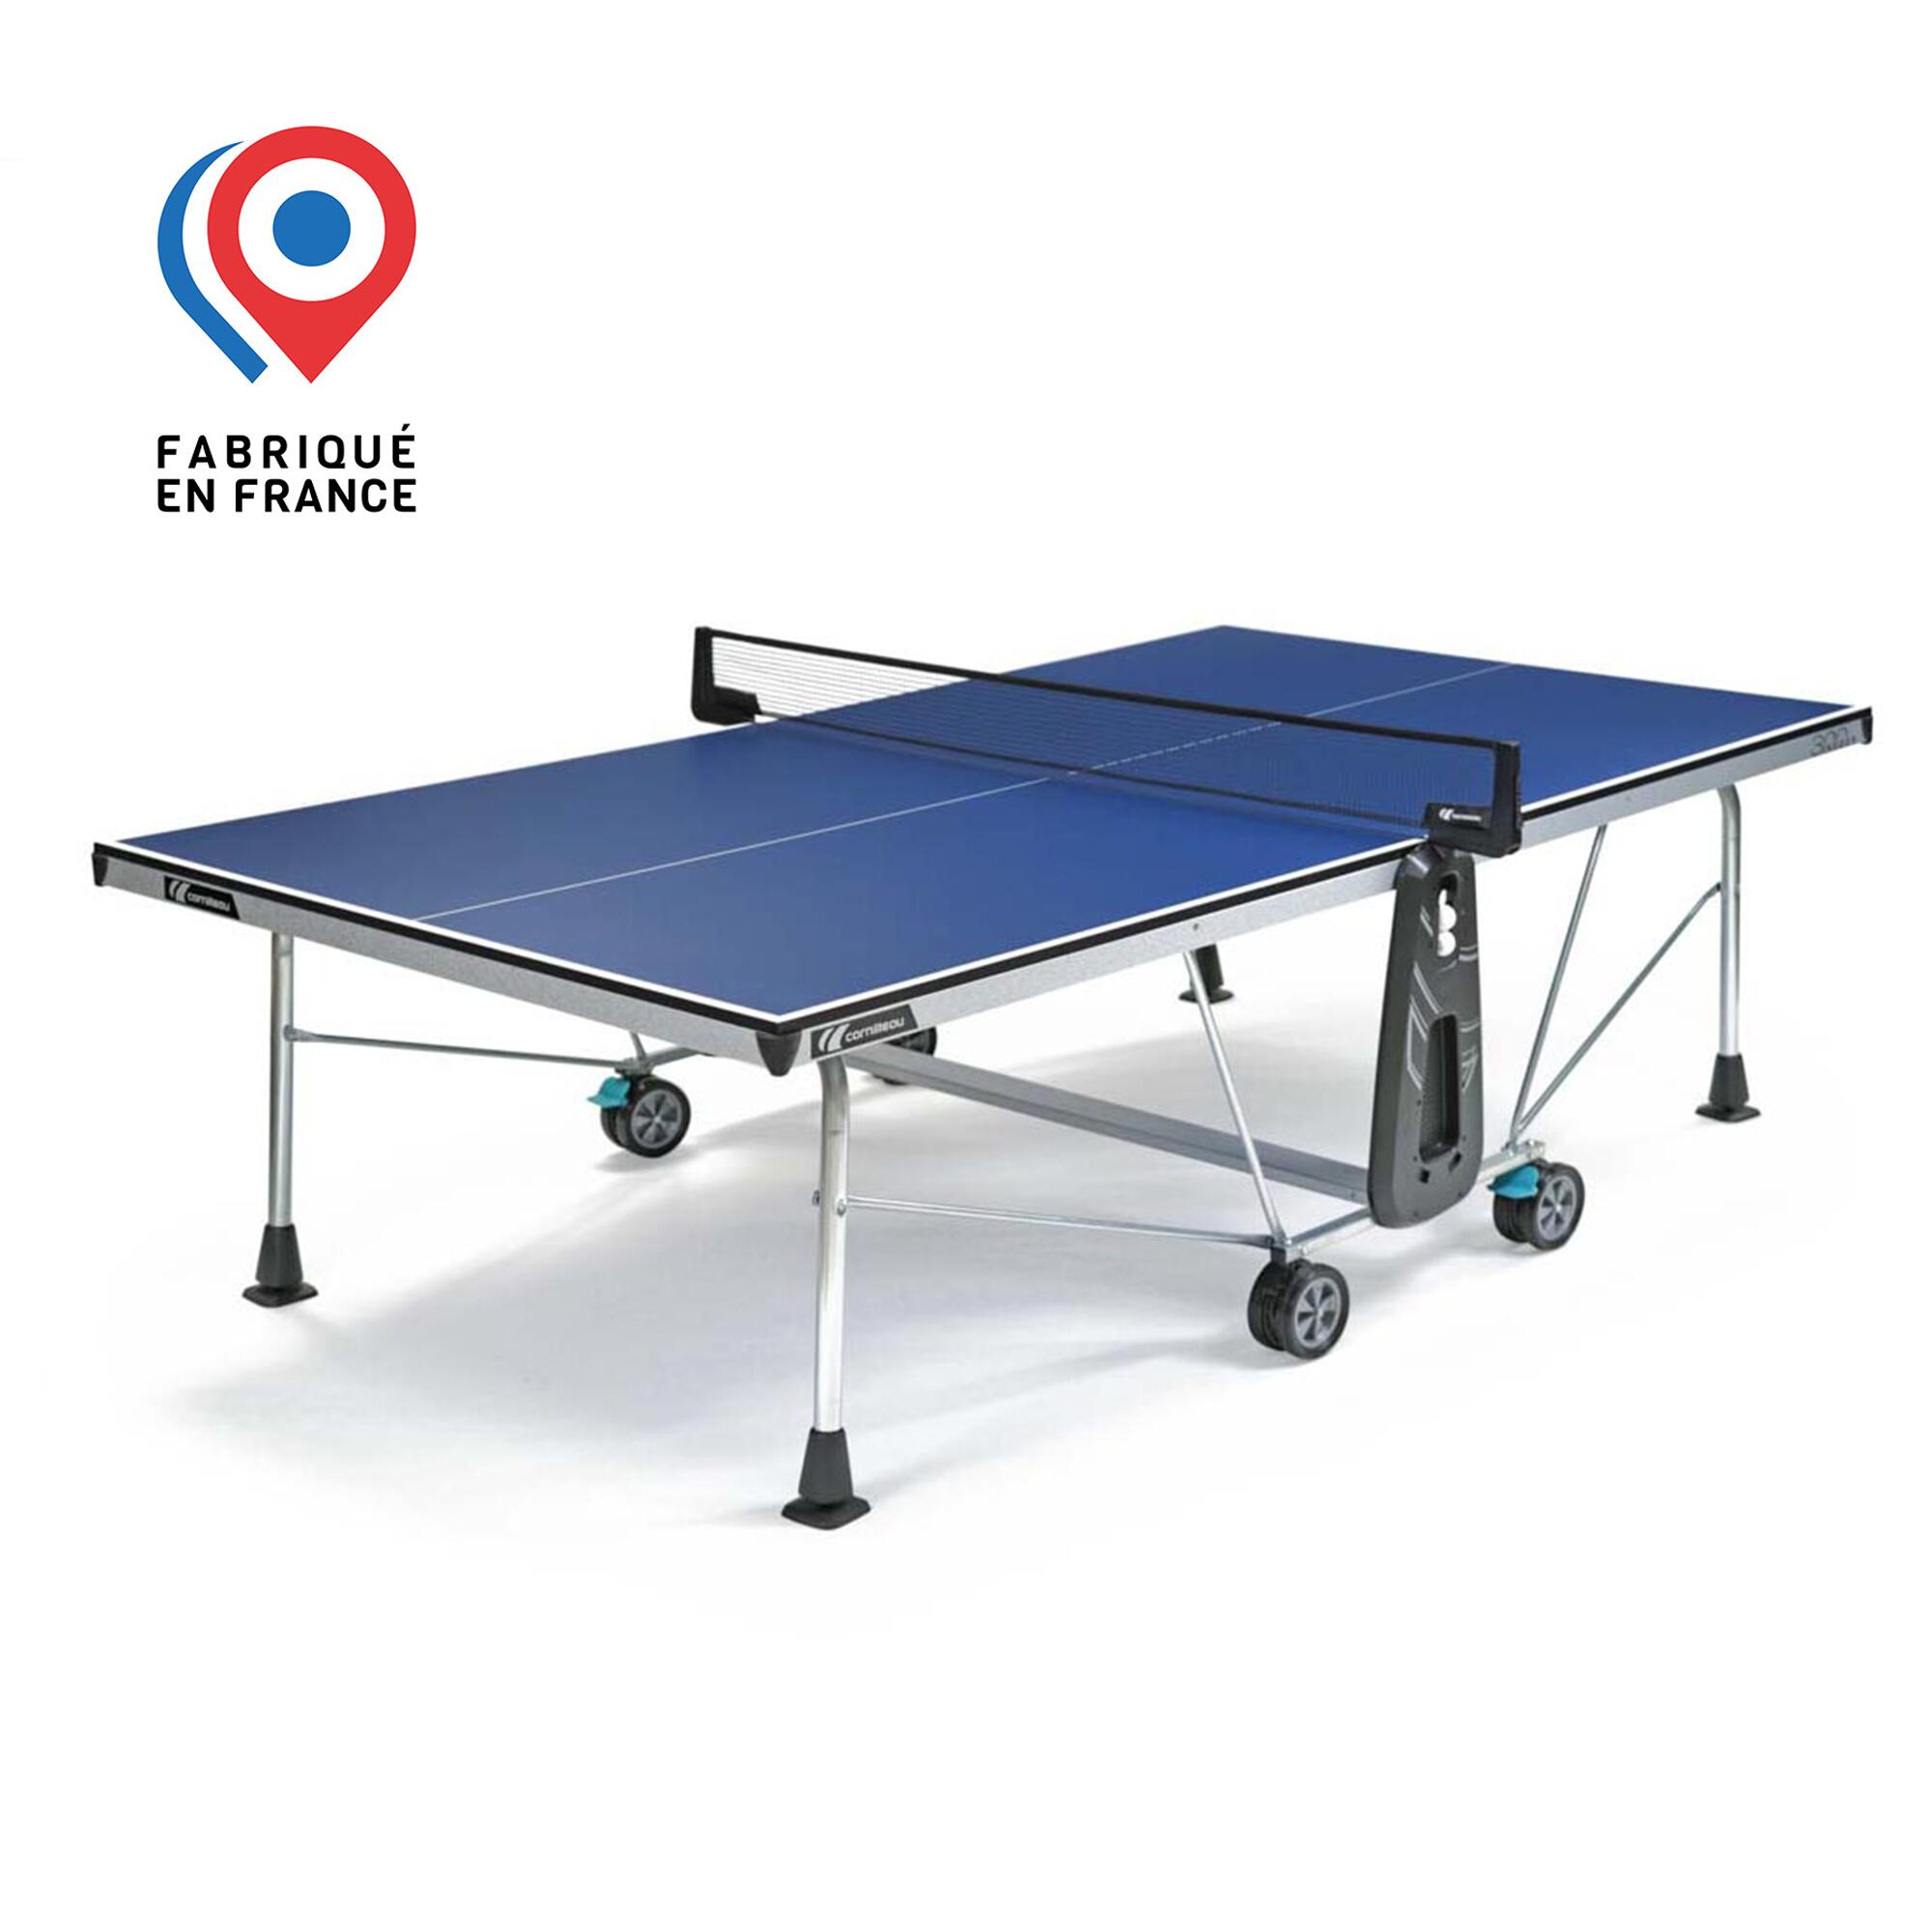 NEW 300 Indoor Table Tennis Table - Blue 1/8